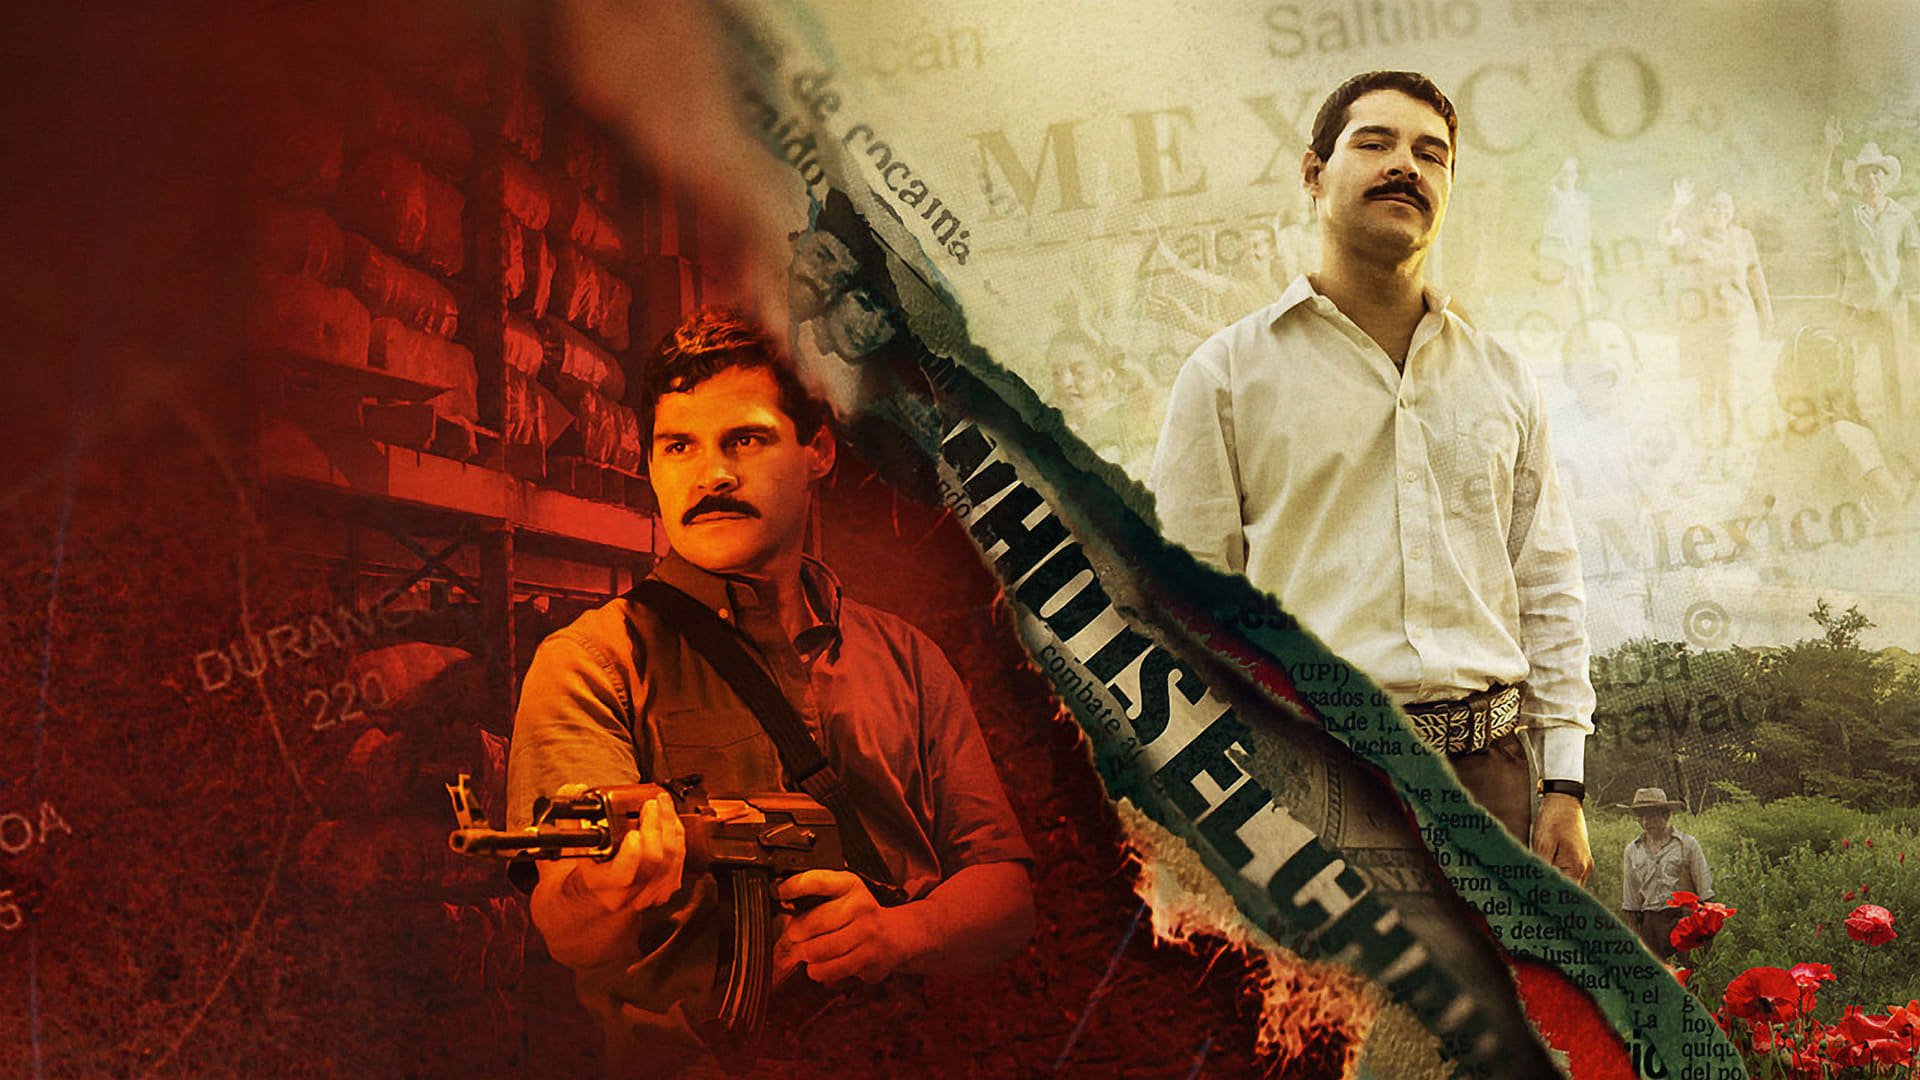 El Chapo wallpaper by F3RSkins  Download on ZEDGE  6720